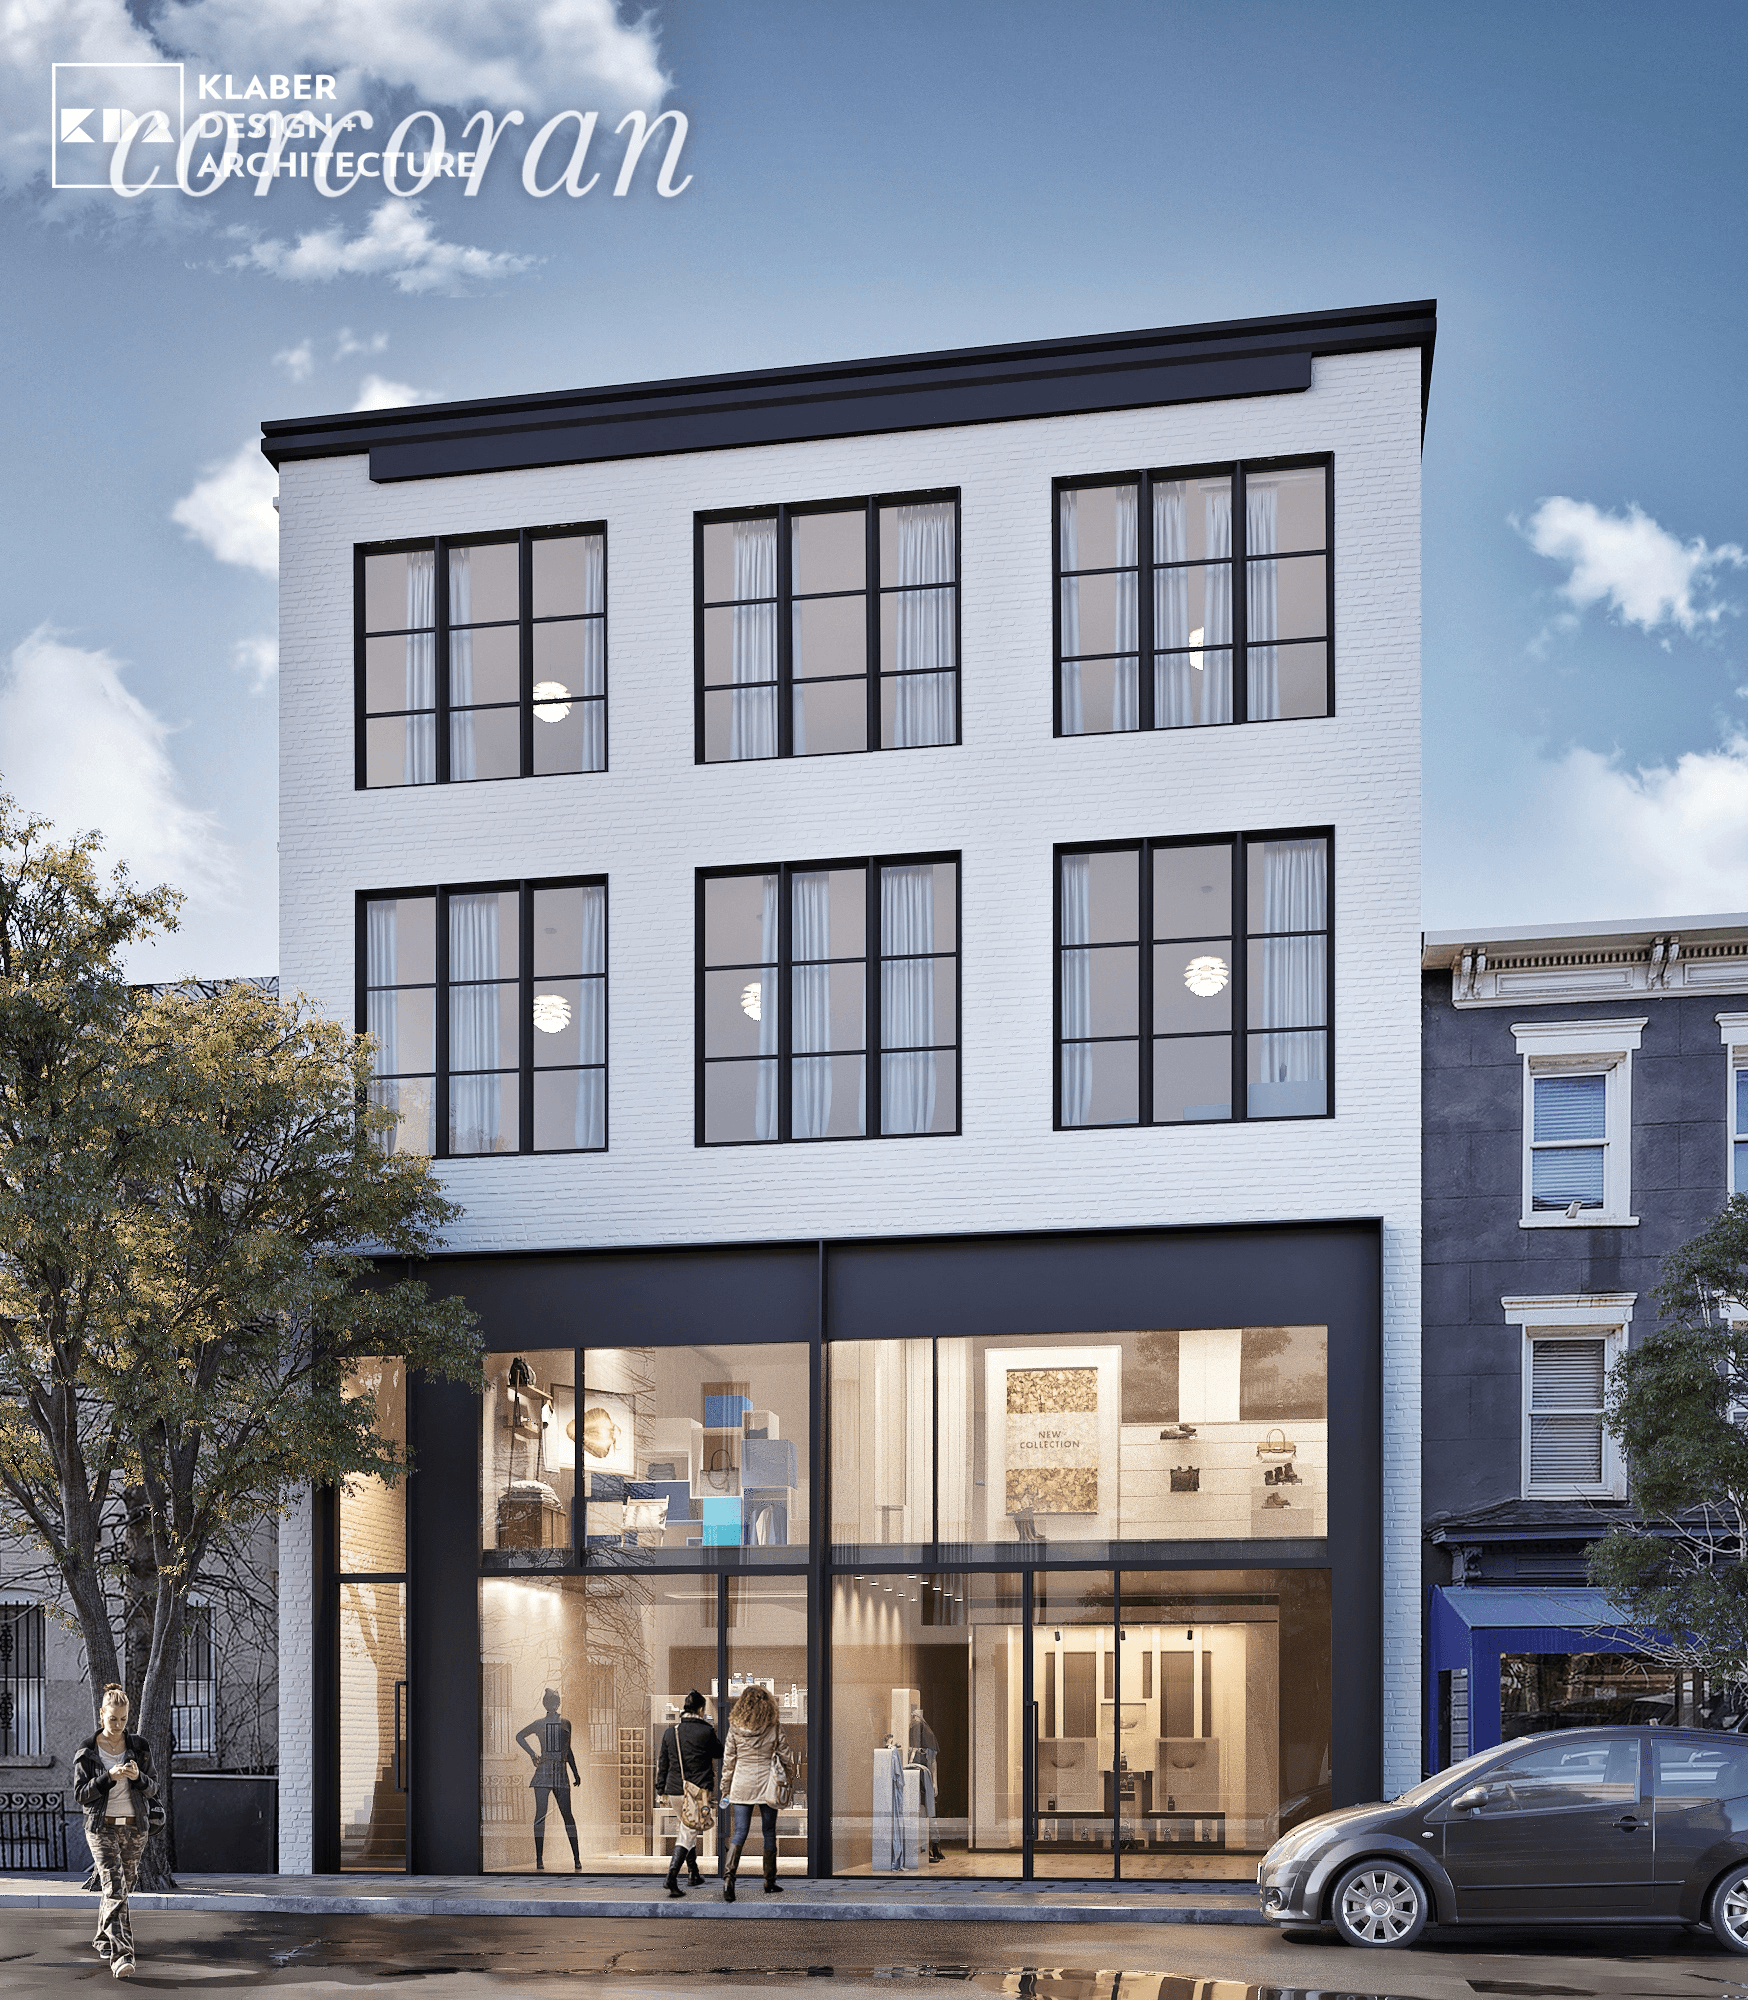 Presenting a Once In A Lifetime Opportunity To Own a 40 Wide, 4, 000 SF Residence in 152 154 Wythe Avenue.